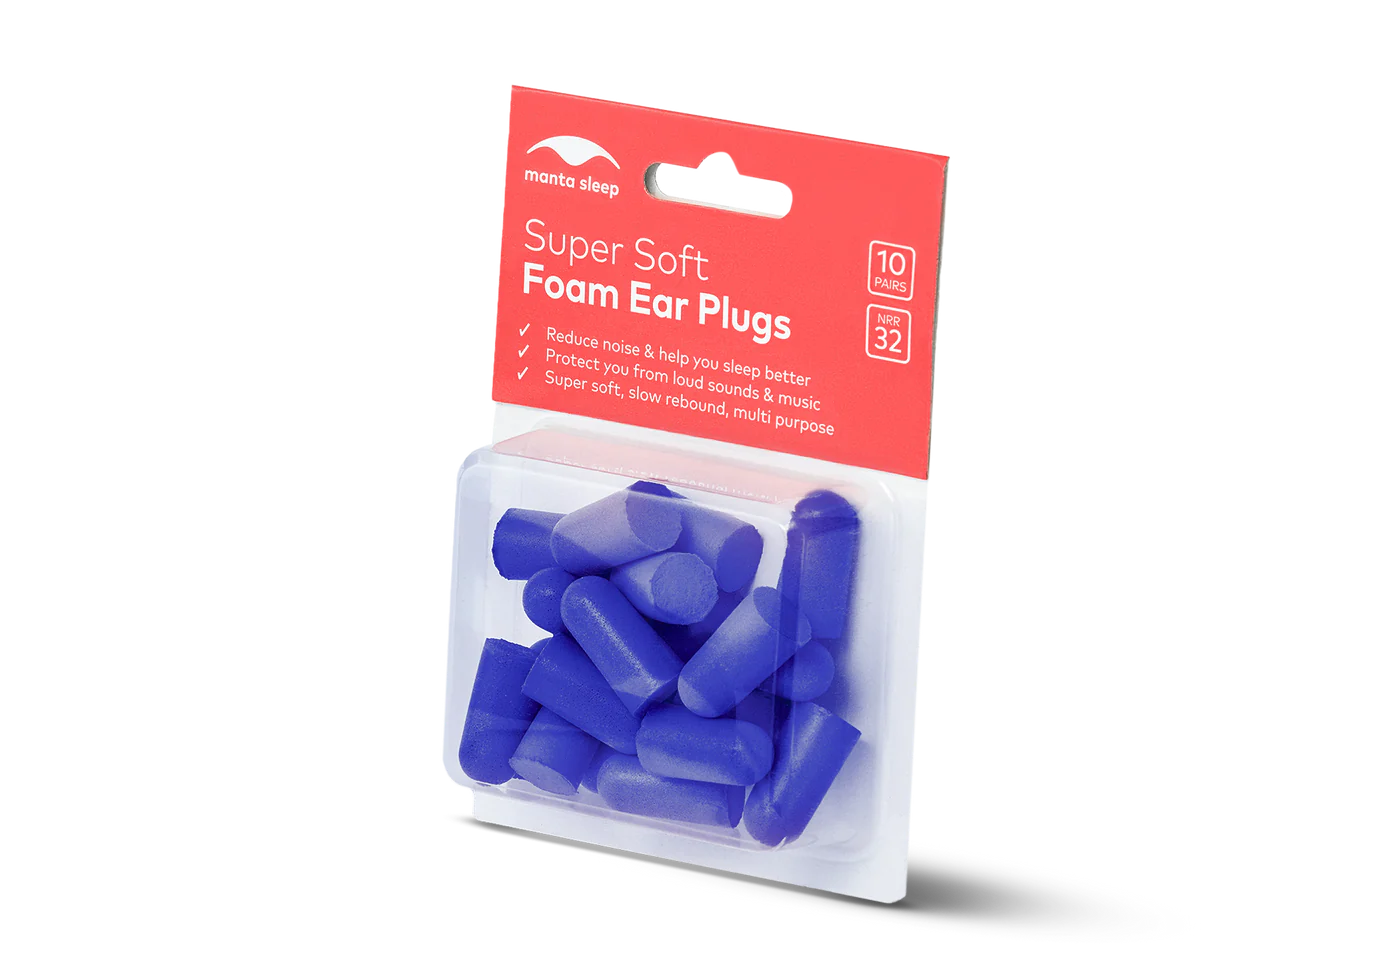 A package with a red label containing 10 pairs of blue earplugs for sleep.